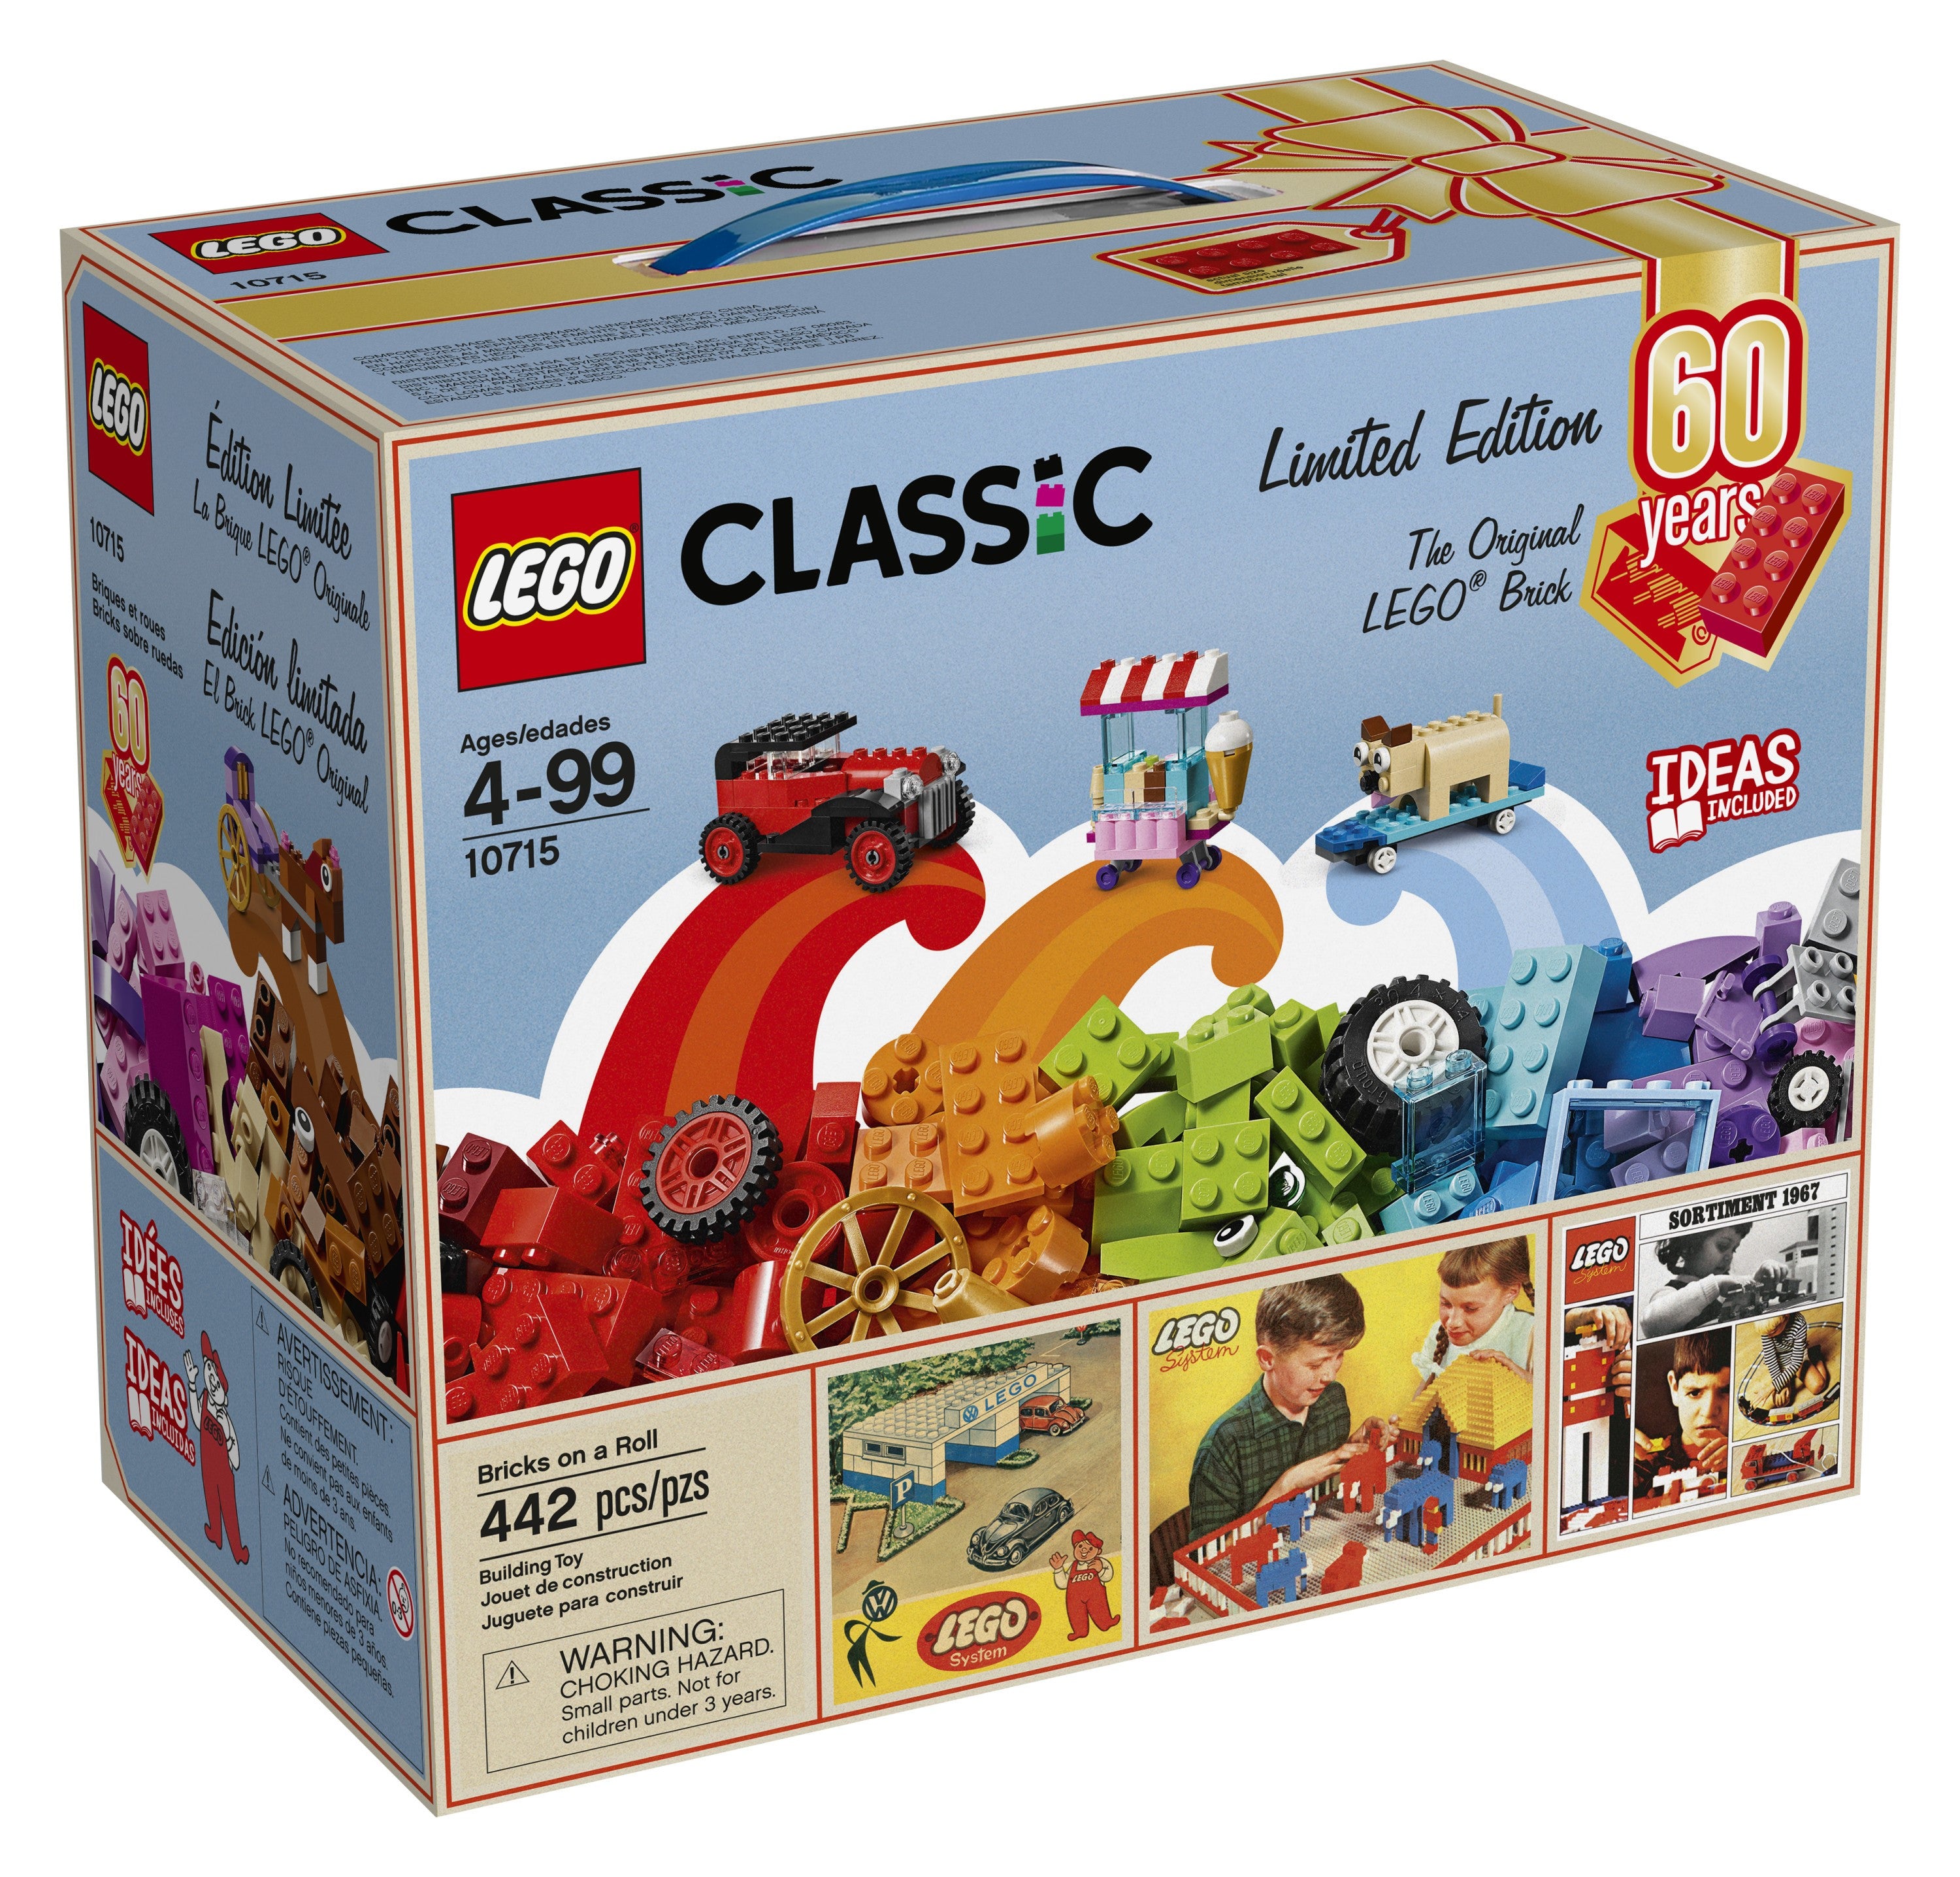 LEGO® CLASSIC 10715 60th of a Roll (442 pieces) – AESOP'S FABLE